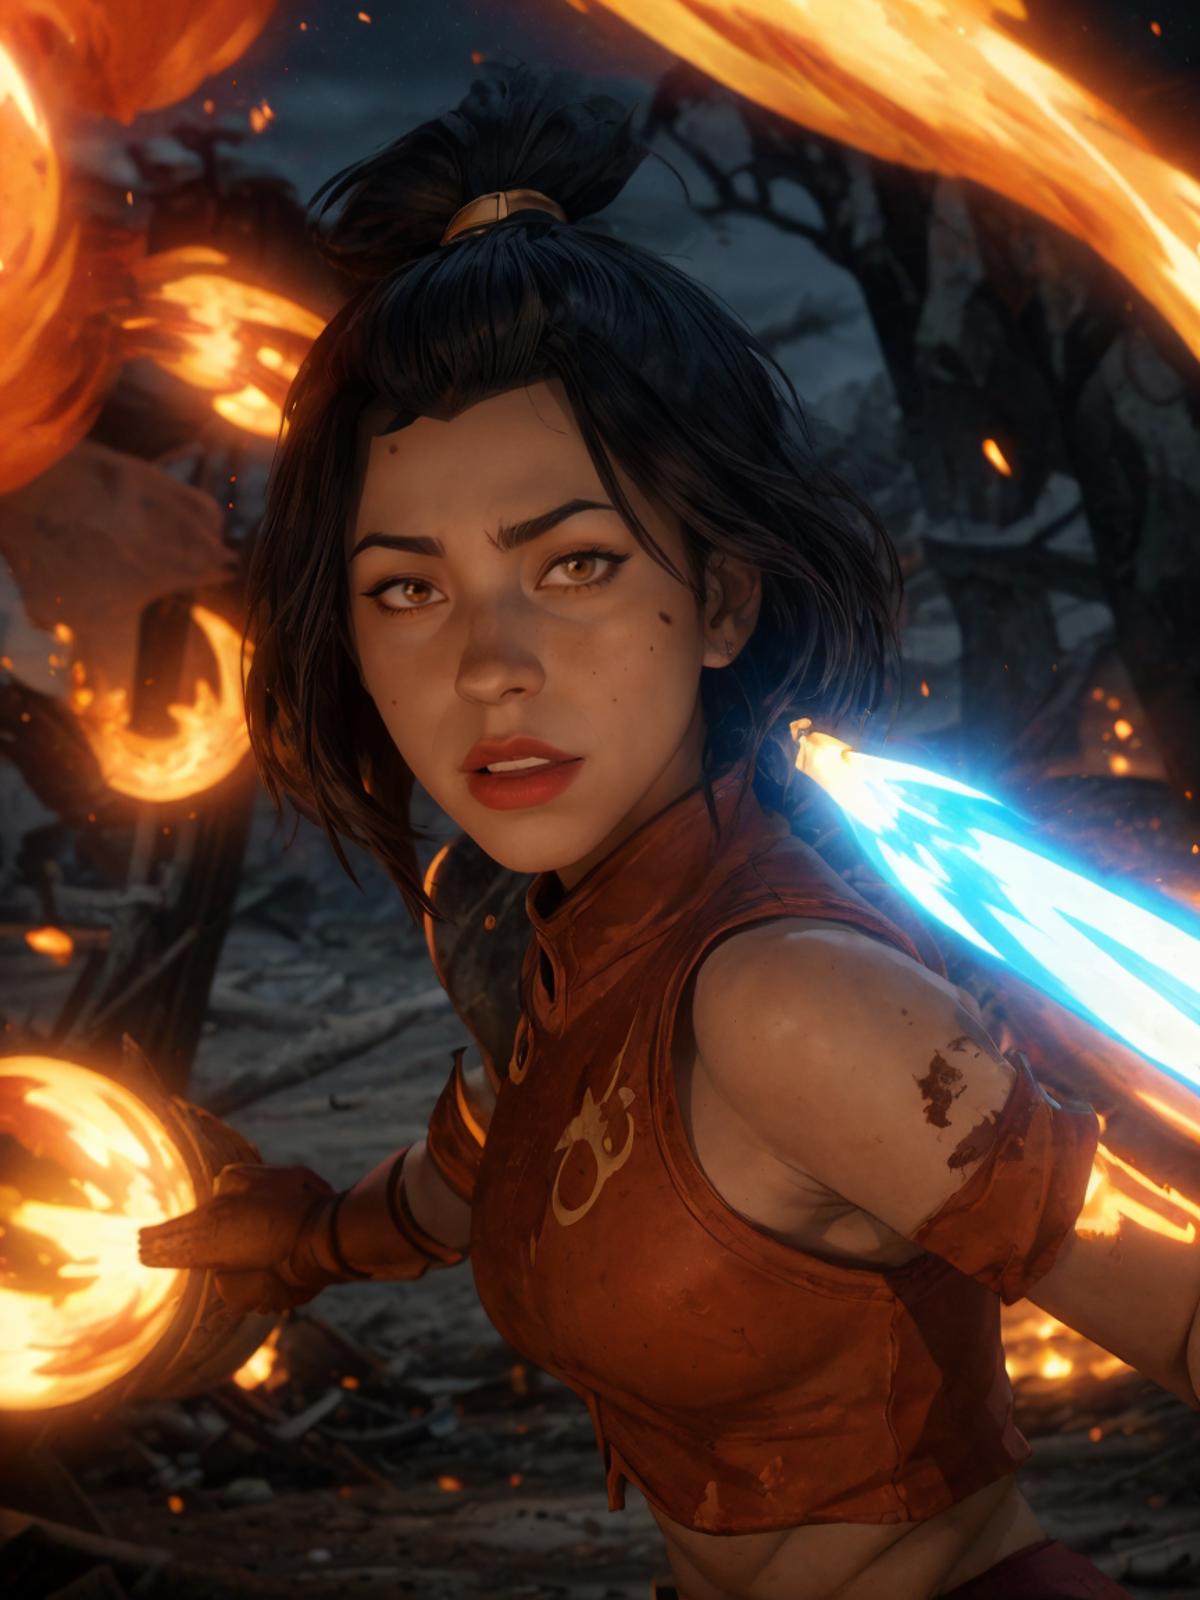 A woman in a red shirt holding a blue sword with fire in the background.